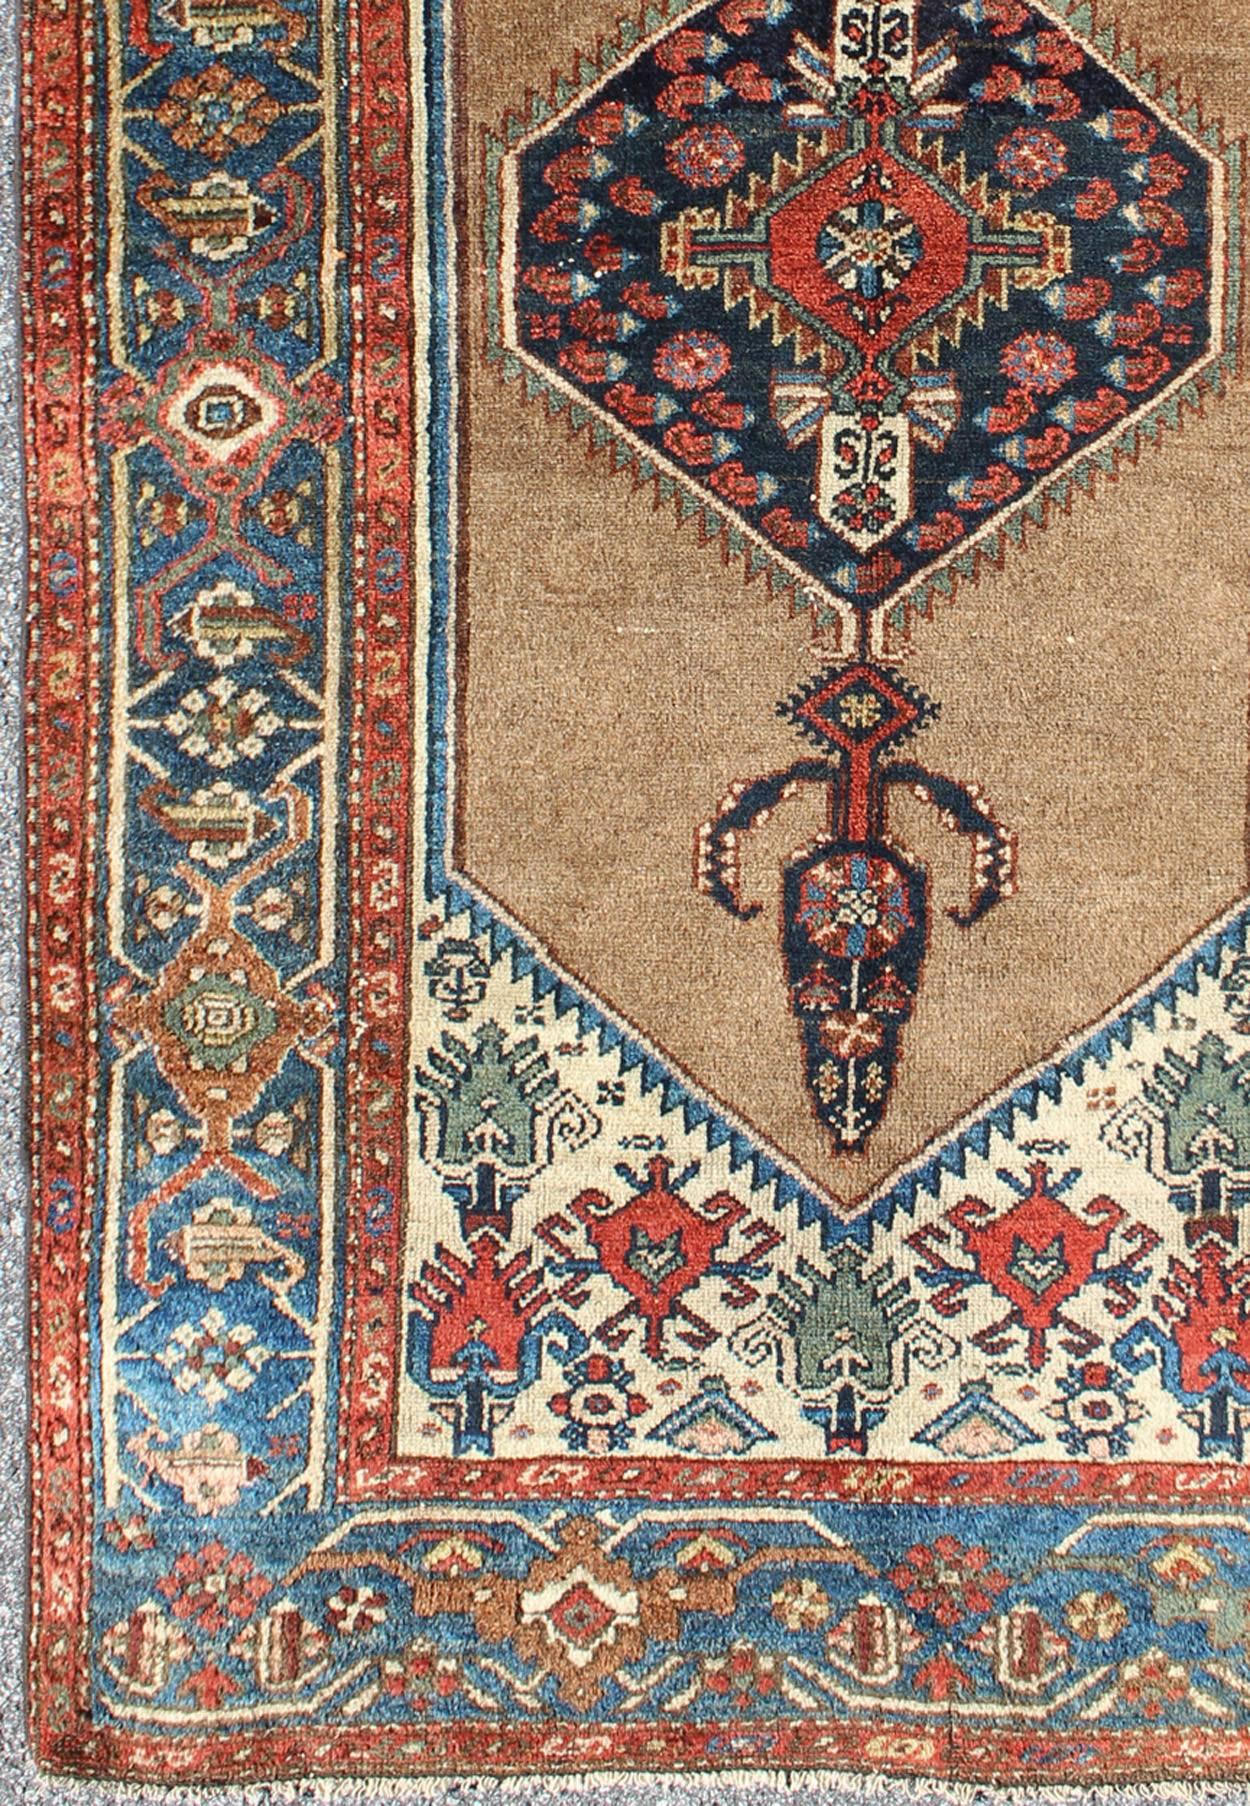 Antique Persian Serab rug with stretched tribal medallion in camel, blue, ivory and red, rug m14-0506, country of origin / type: Iran / Serab, circa 1900

This early 20th century, handwoven antique Persian Serab rug features a camel-colored field